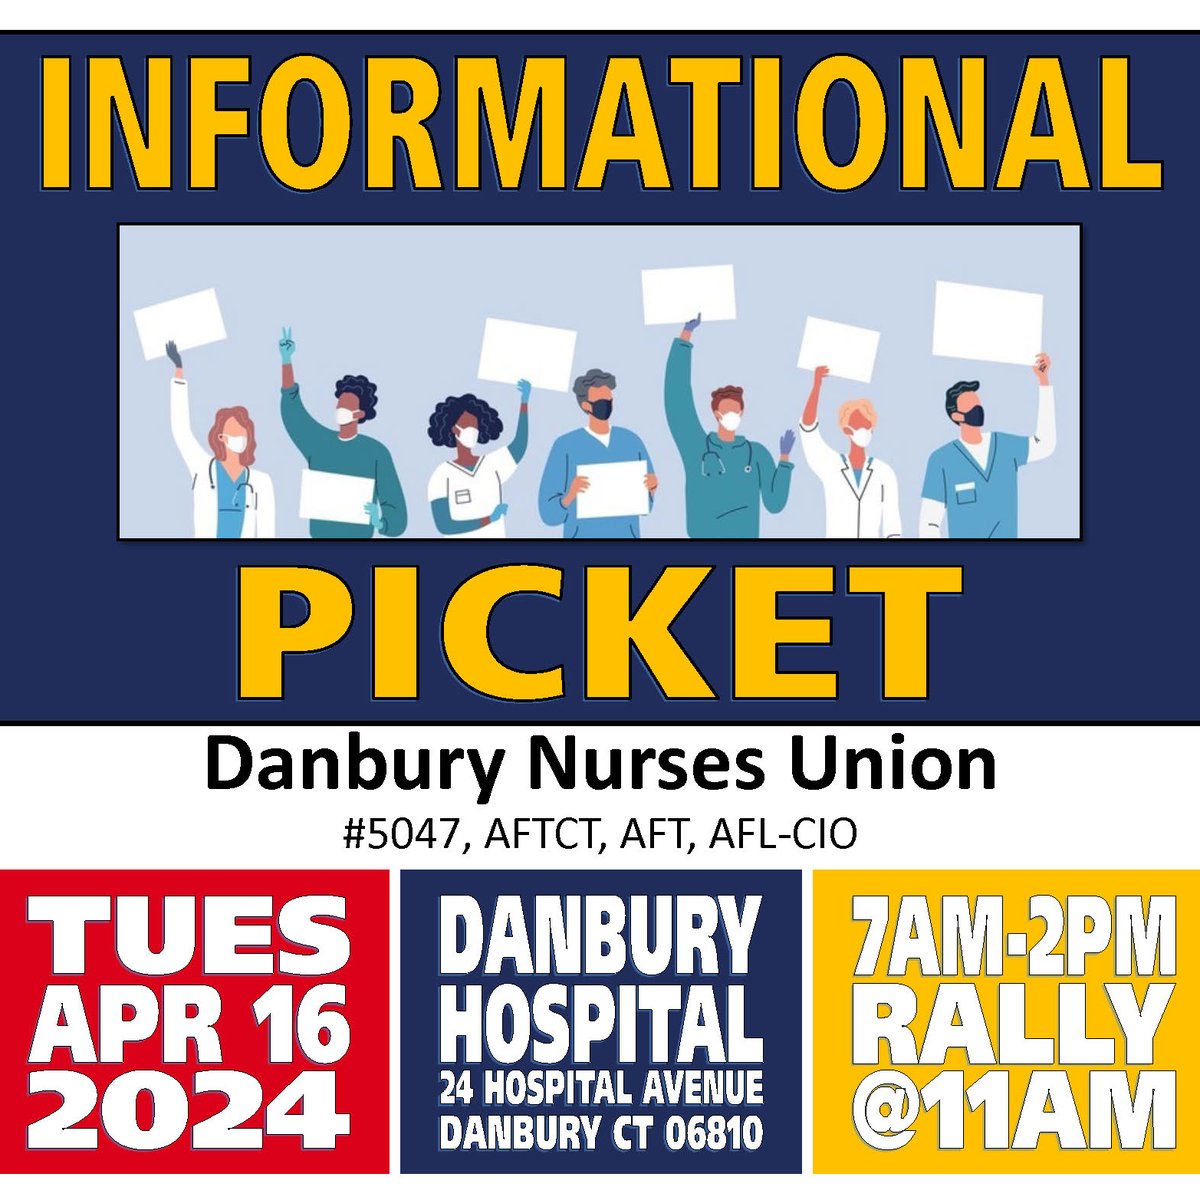 Next week help us tell @NuvanceHealth's execs that we're #WorthMore than their latest #union contract proposals; rally & picket to #CareForTheCaregivers: unit47.ct.aft.org/events/stand-d… #UnionYES @AFTUnion @AFTHealthcare @AFTCT @AFLCIO @ConnAFLCIO